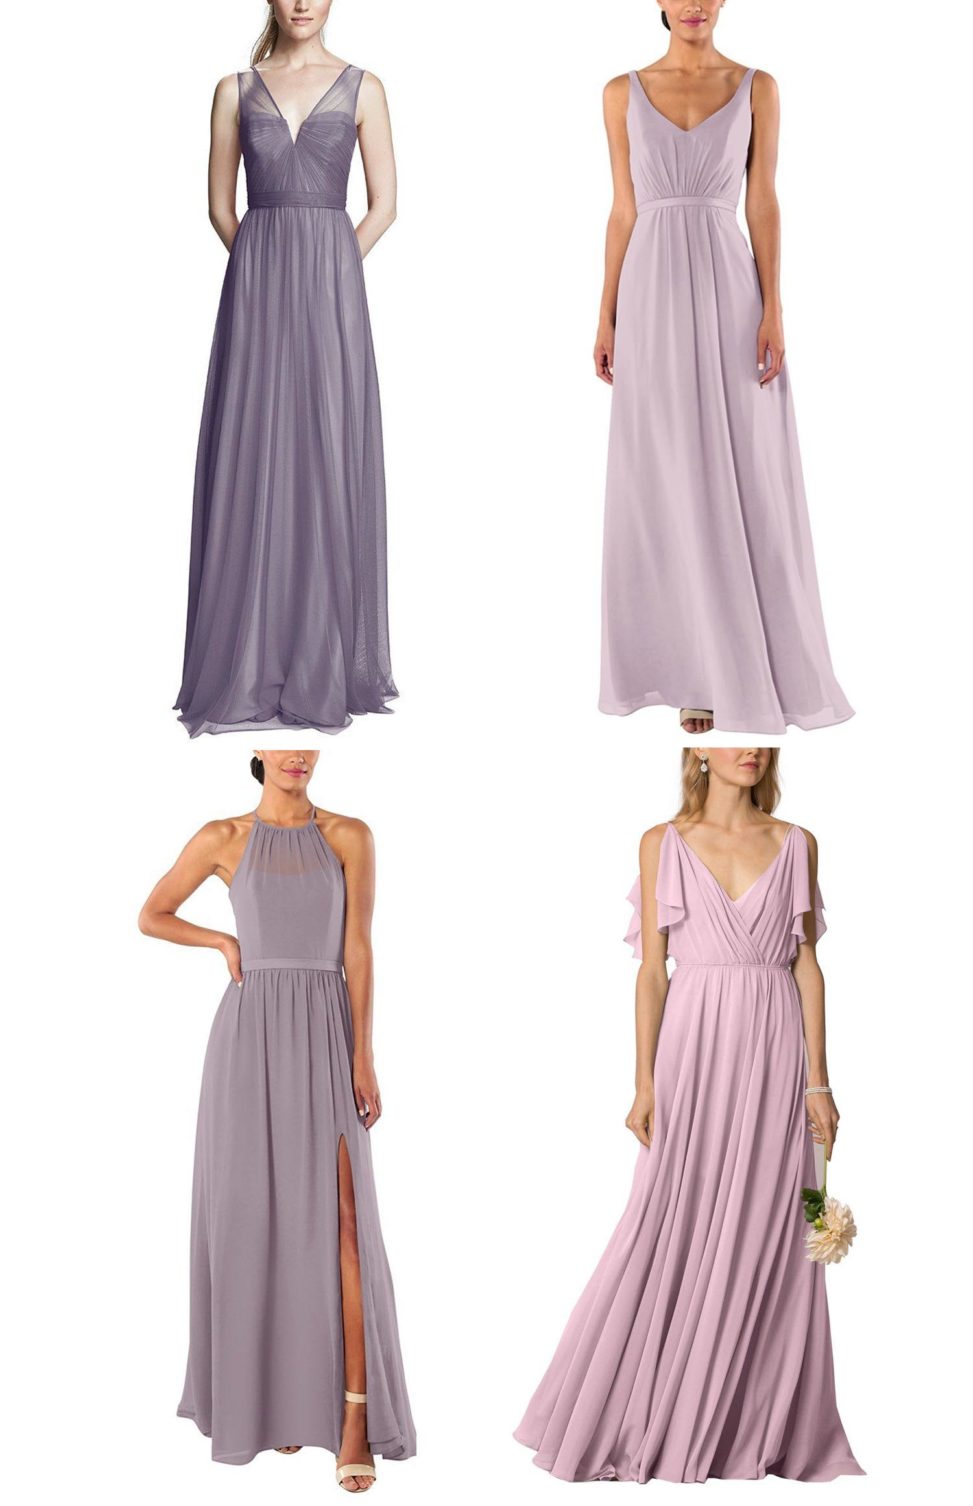 bridesmaids wearing mismatched bridesmaid dresses in a combination of light purple and mauve and blush